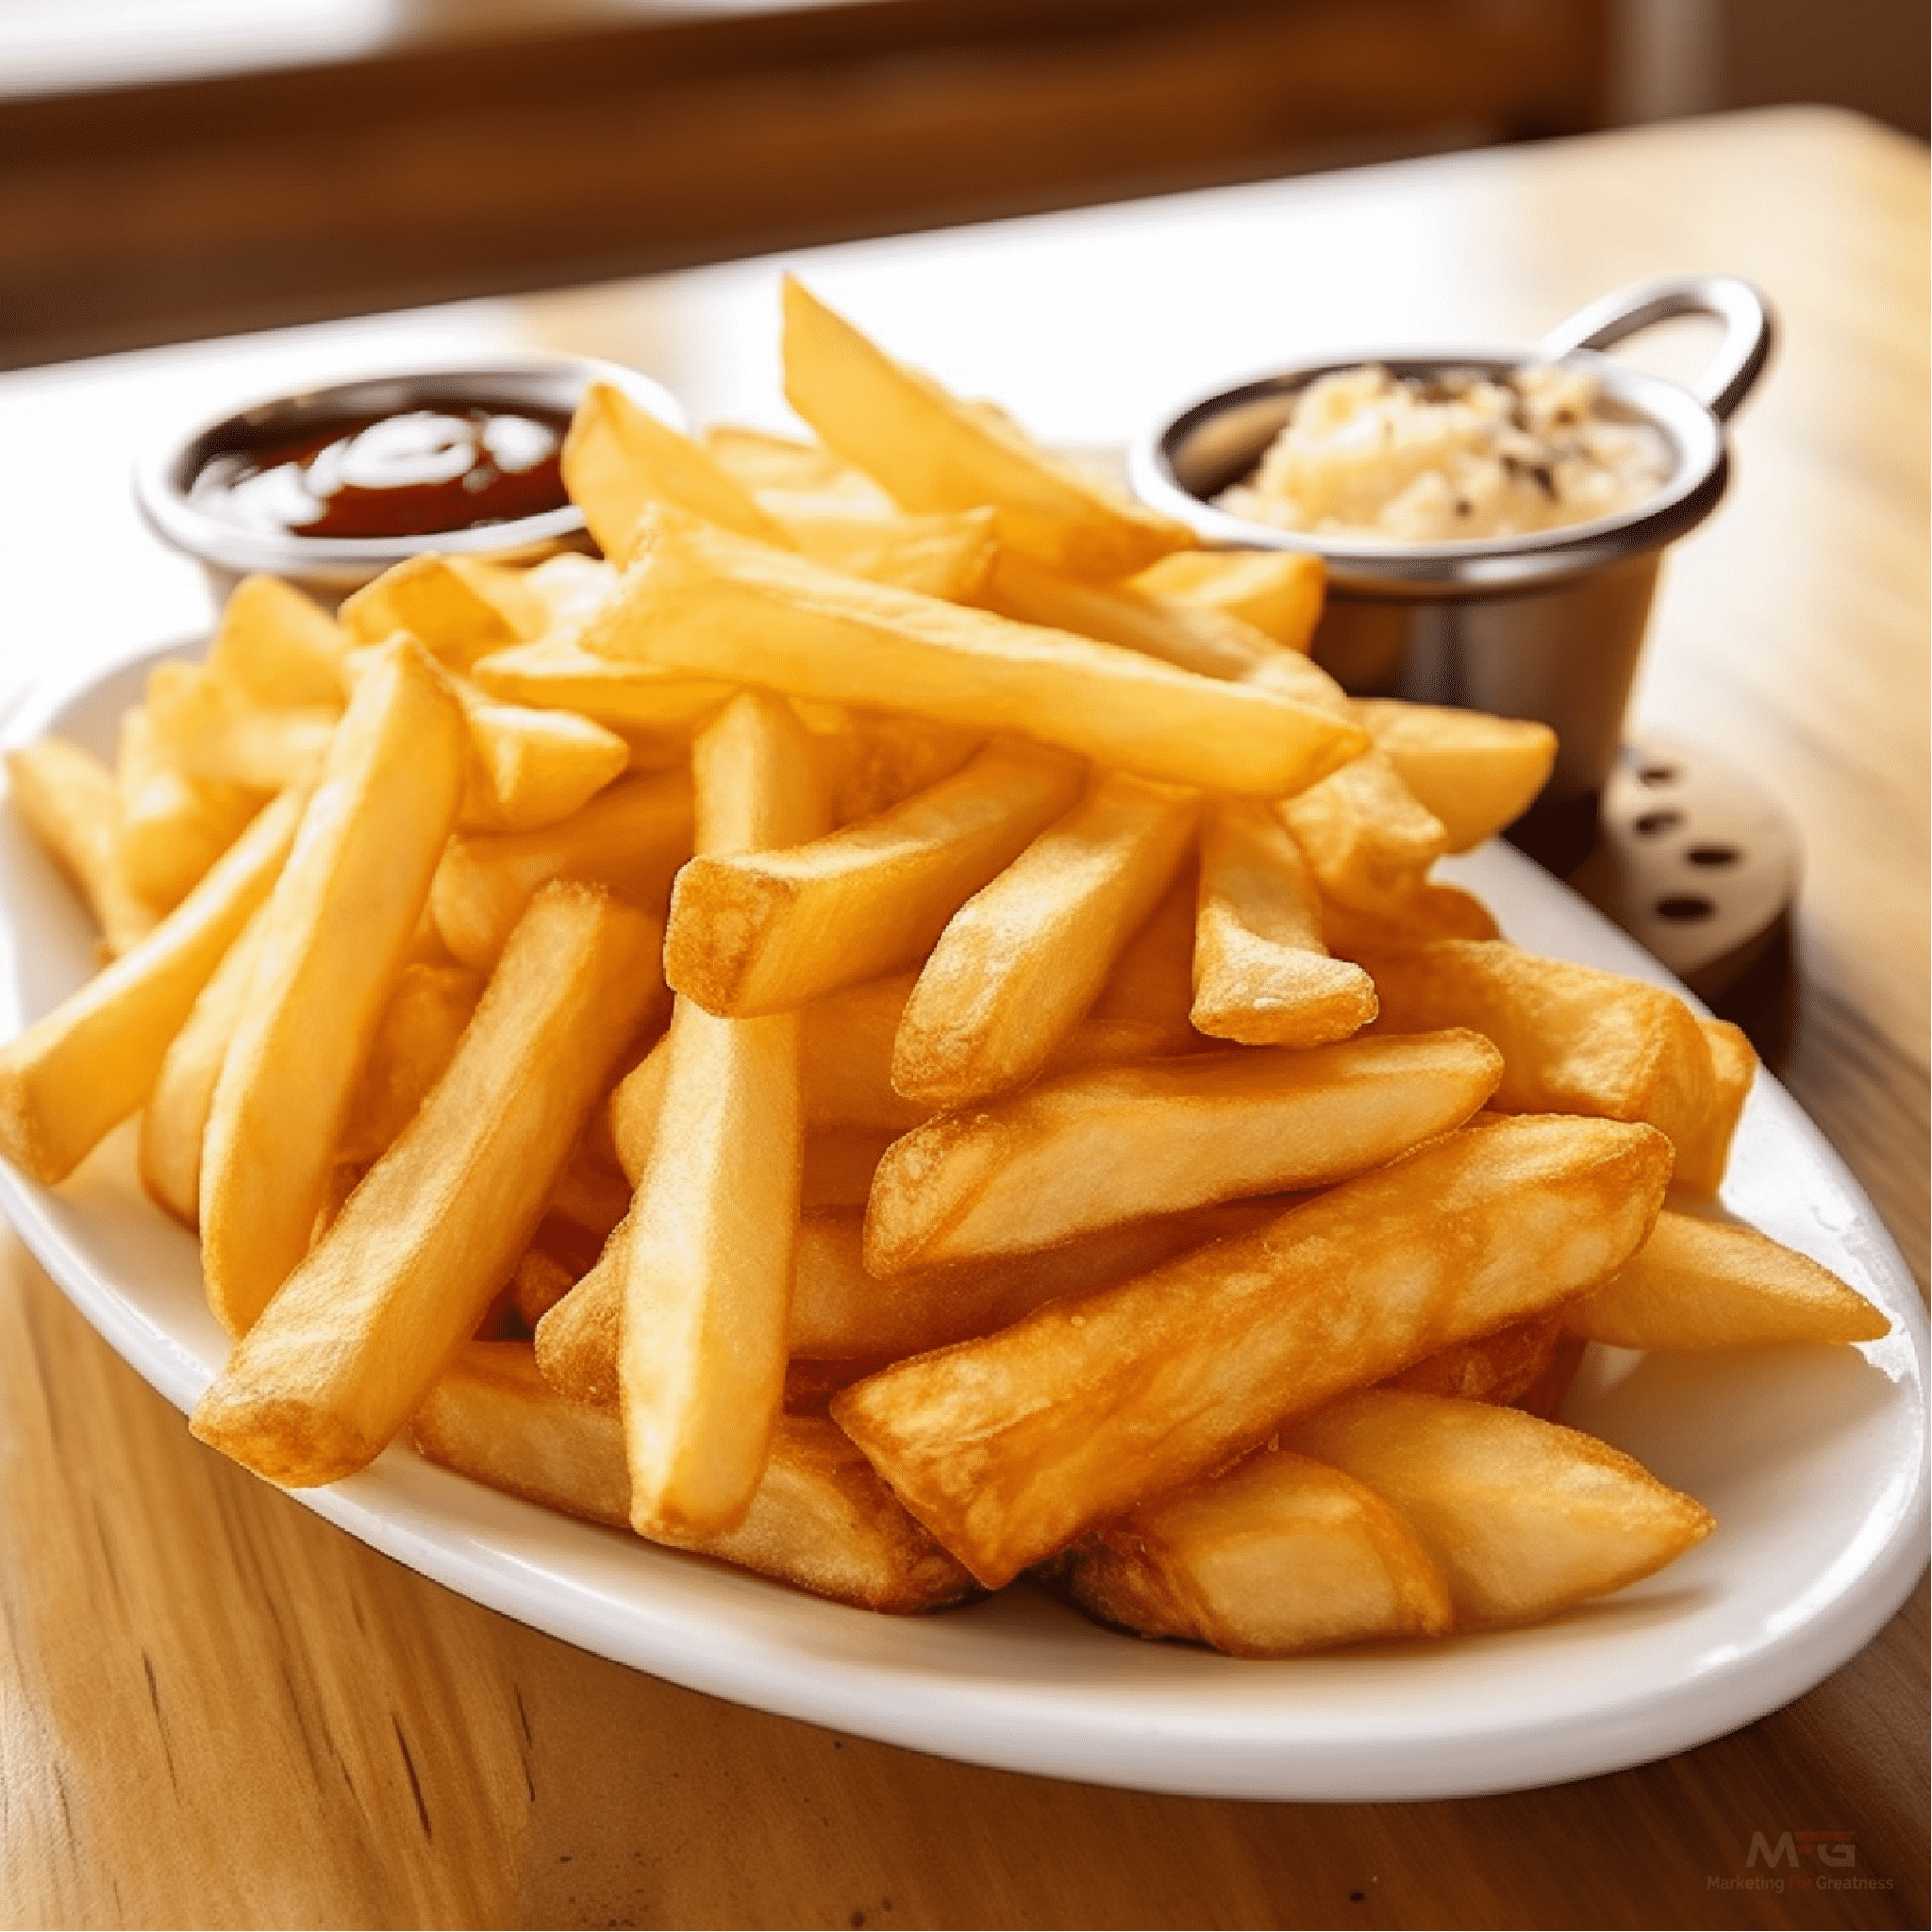 Chips (United Kingdom): Thicker than American-style fries, chips are a staple of British cuisine and often served with fish, sausages, or pies.